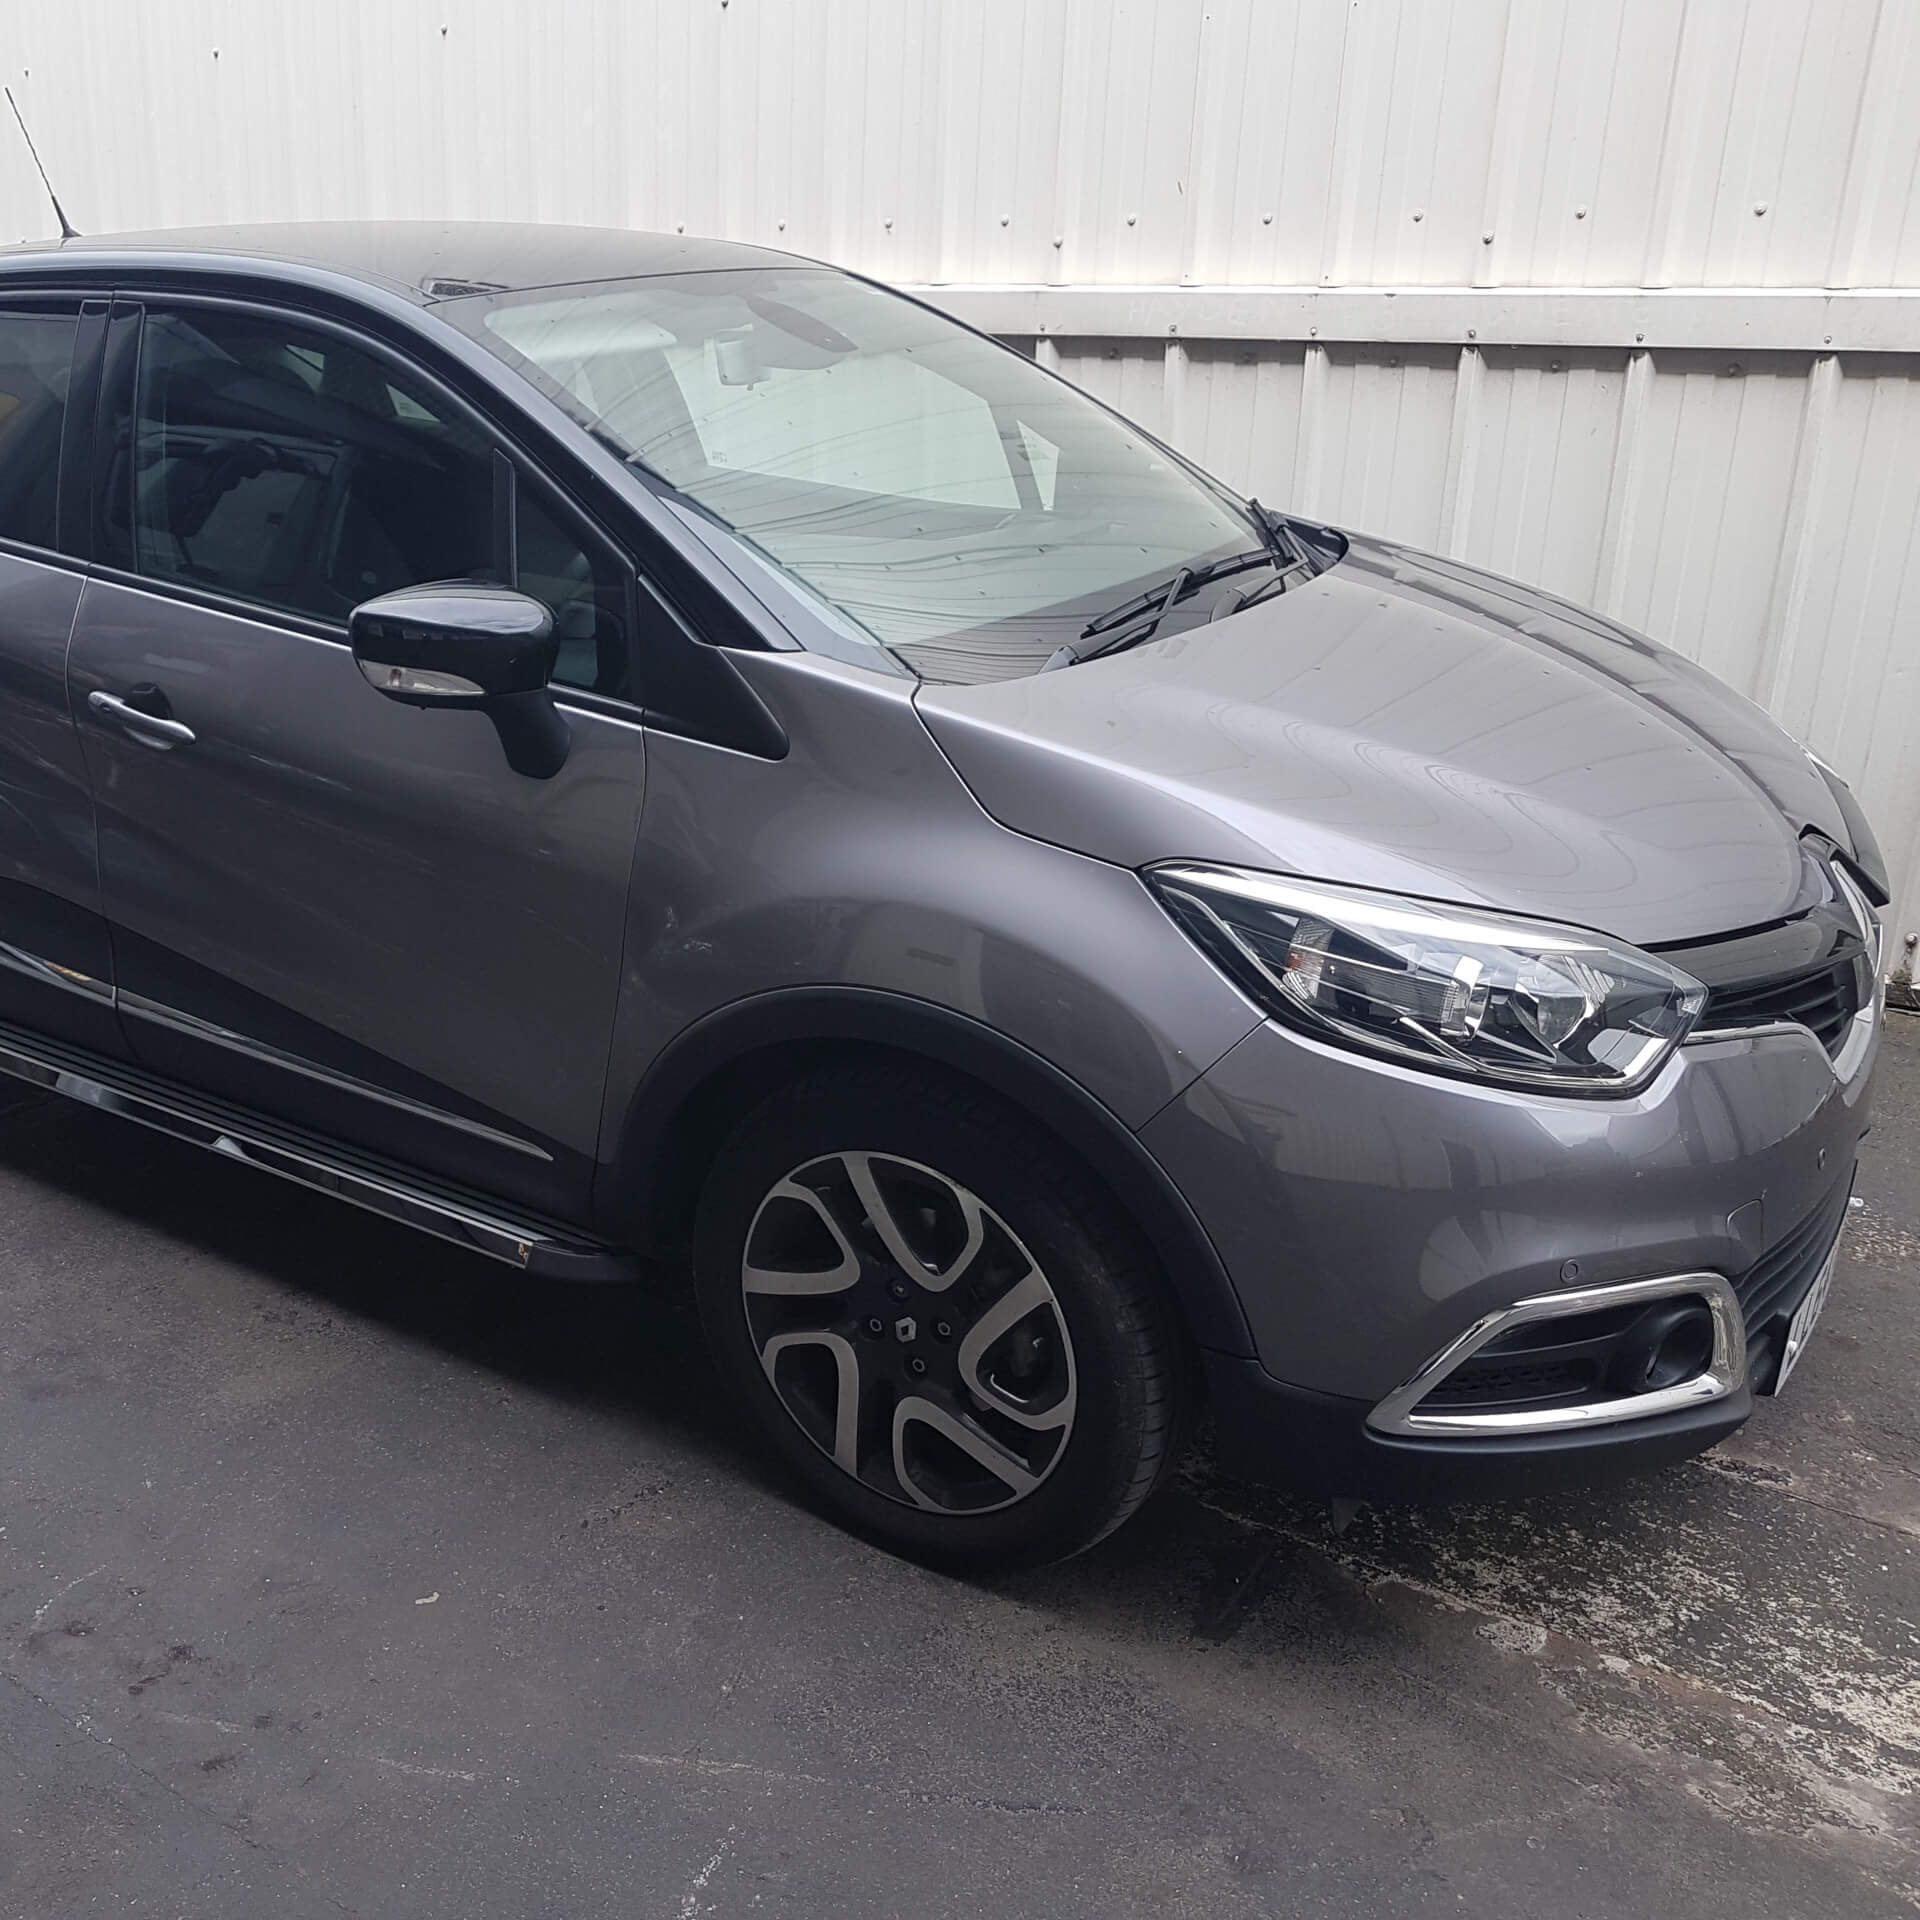 Direct4x4 accessories for Renault Captur vehicles with a photo of a grey Renault Captur parked outside our depot